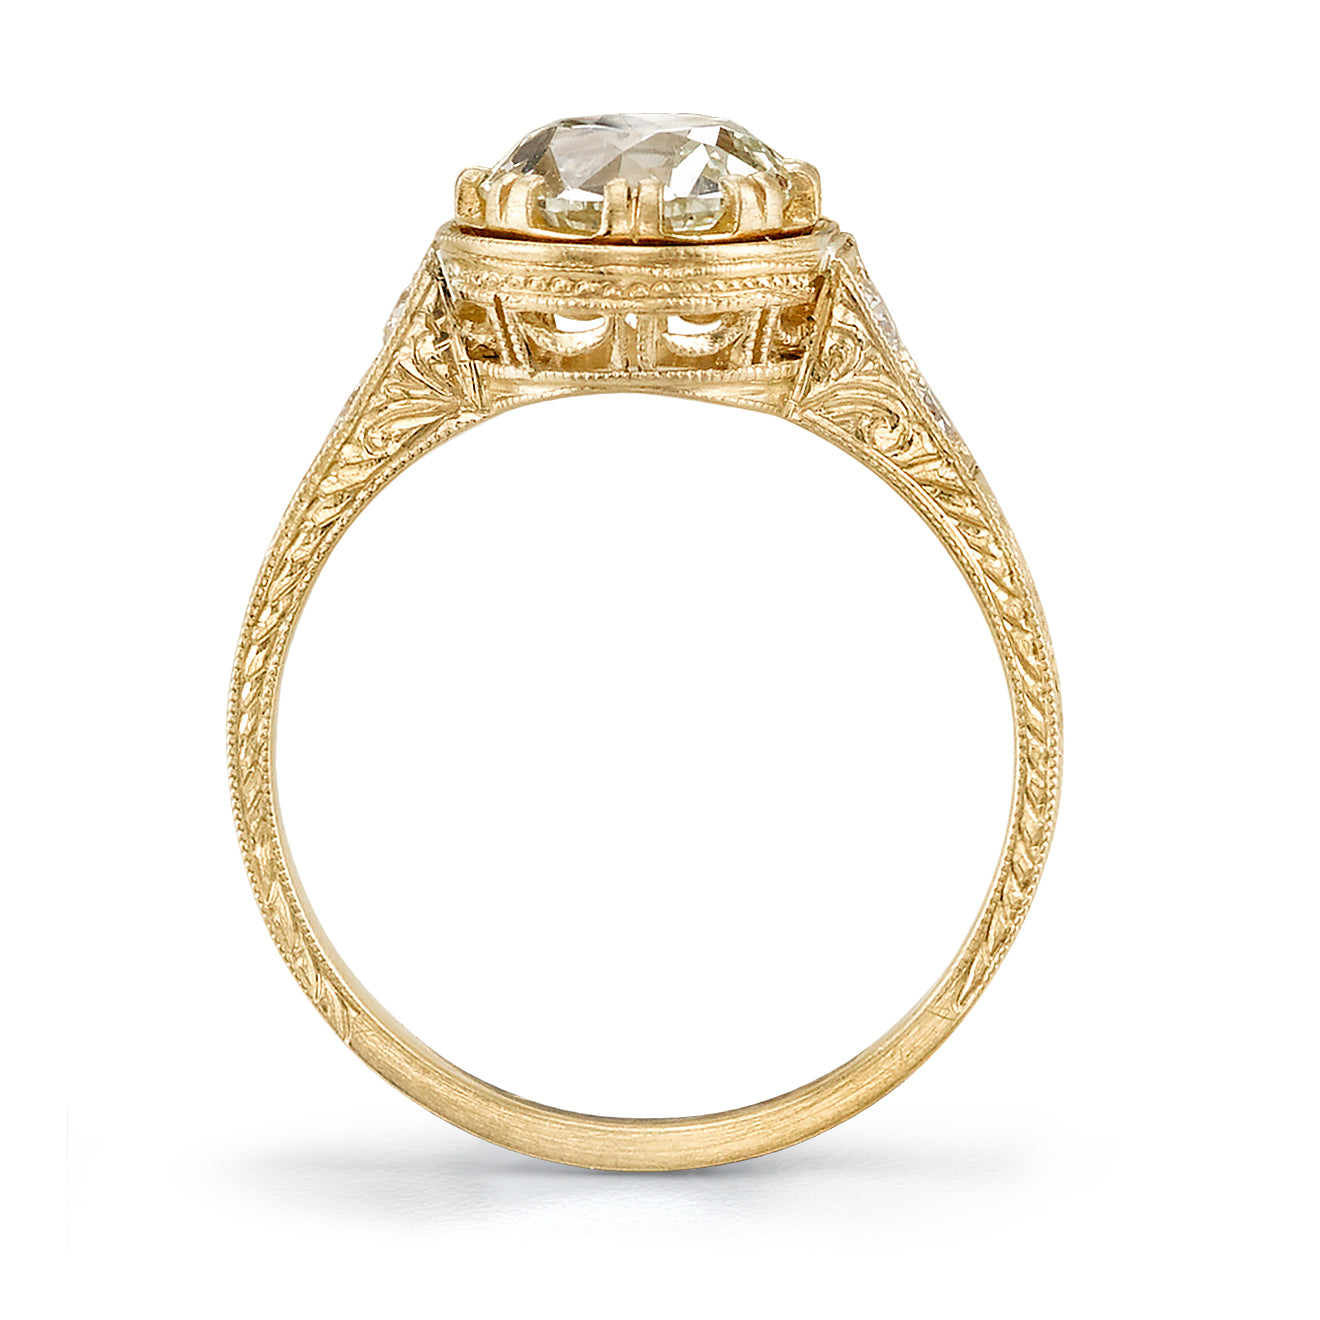 SINGLE STONE AUBREY RING featuring 1.20ct J/VS2 EGL certified old European cut diamond with 0.13ctw old European cut accent diamonds set in a handcrafted 18K yellow gold mounting.